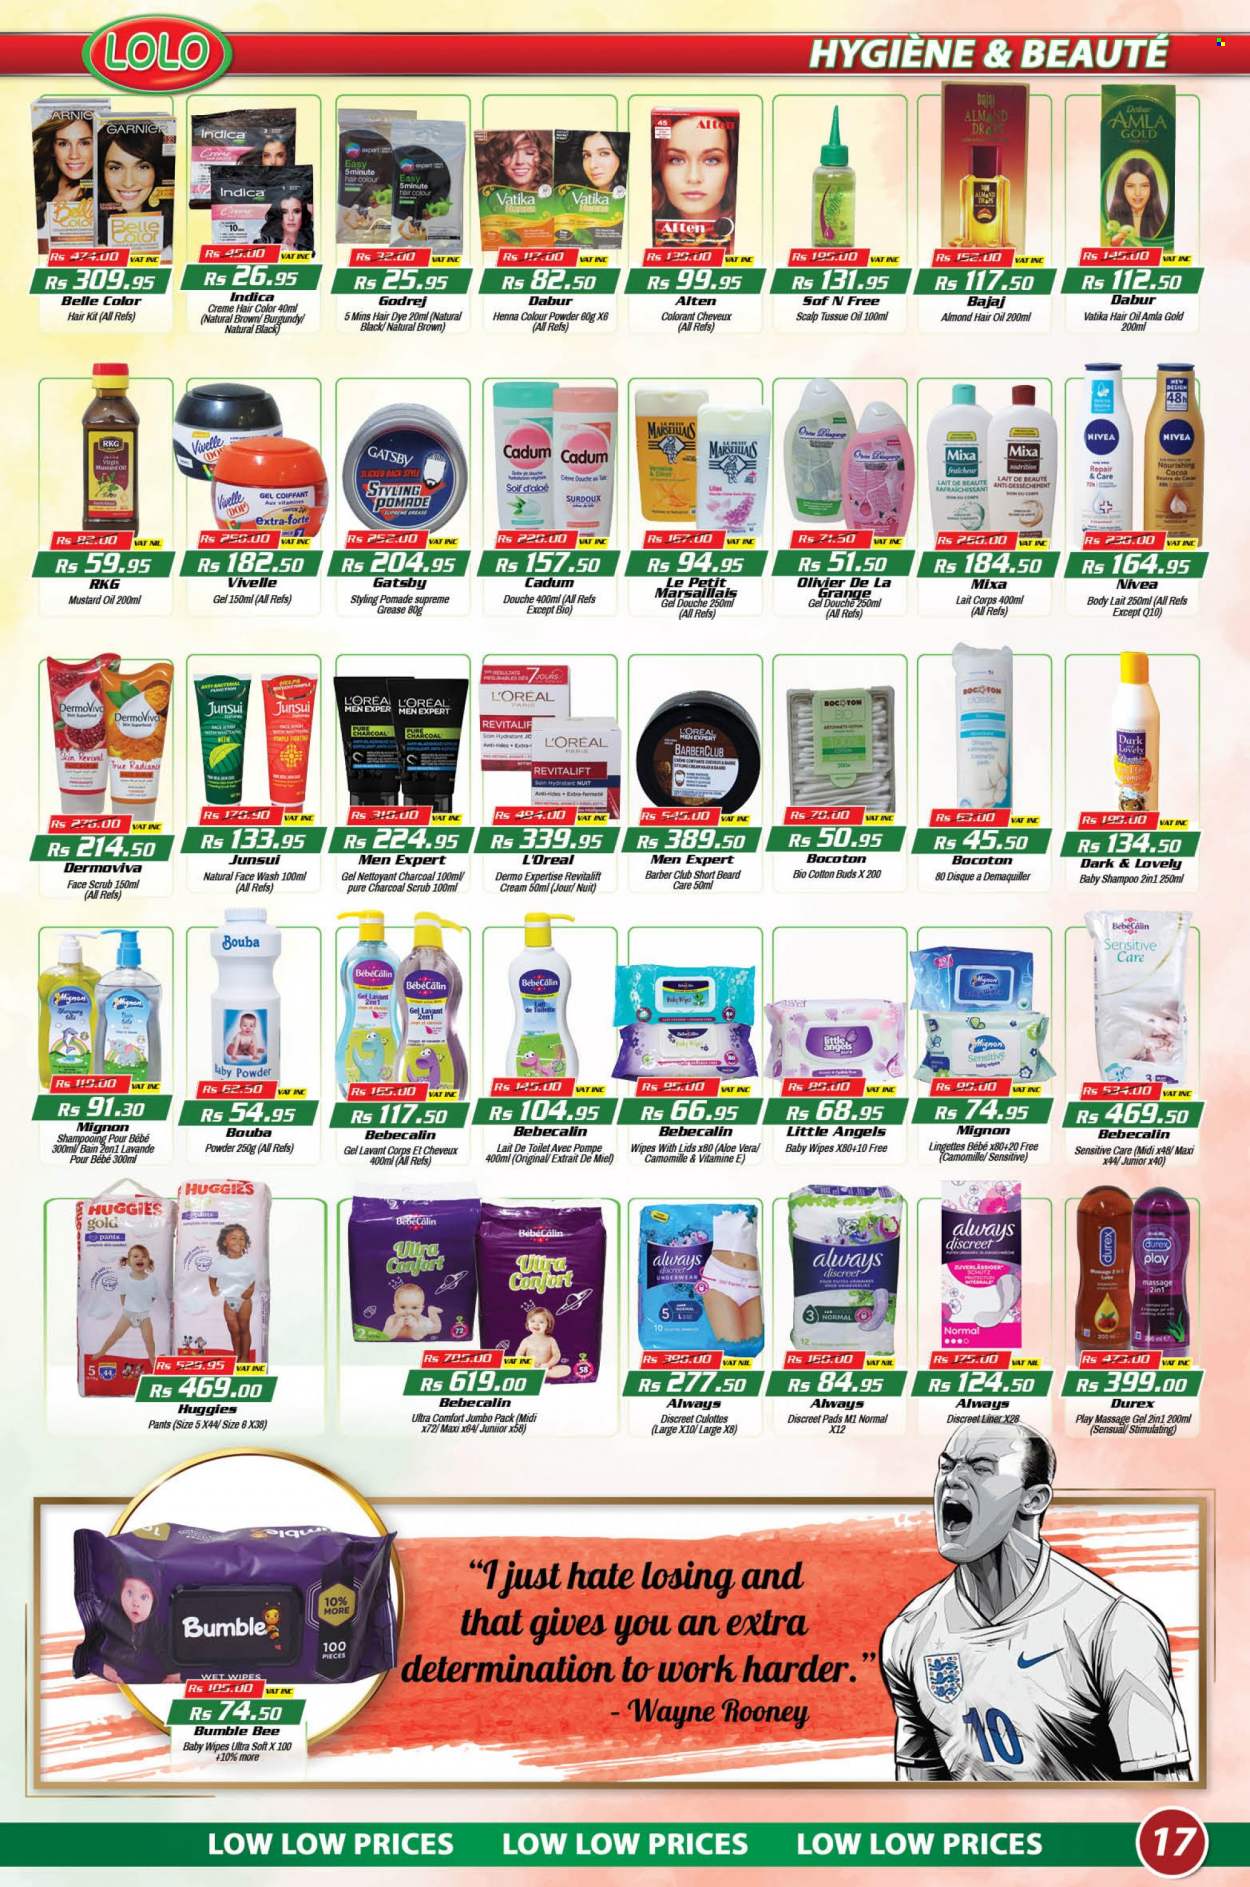 thumbnail - LOLO Hyper Catalogue - 25.11.2022 - 14.12.2022 - Sales products - Bumble Bee, cocoa, Dabur, mustard oil, oil, wipes, pants, baby wipes, Nivea, baby powder, face gel, sanitary pads, Always Discreet, L’Oréal, L’Oréal Men, face wash, hair color, hair oil, shampoo, Huggies. Page 17.